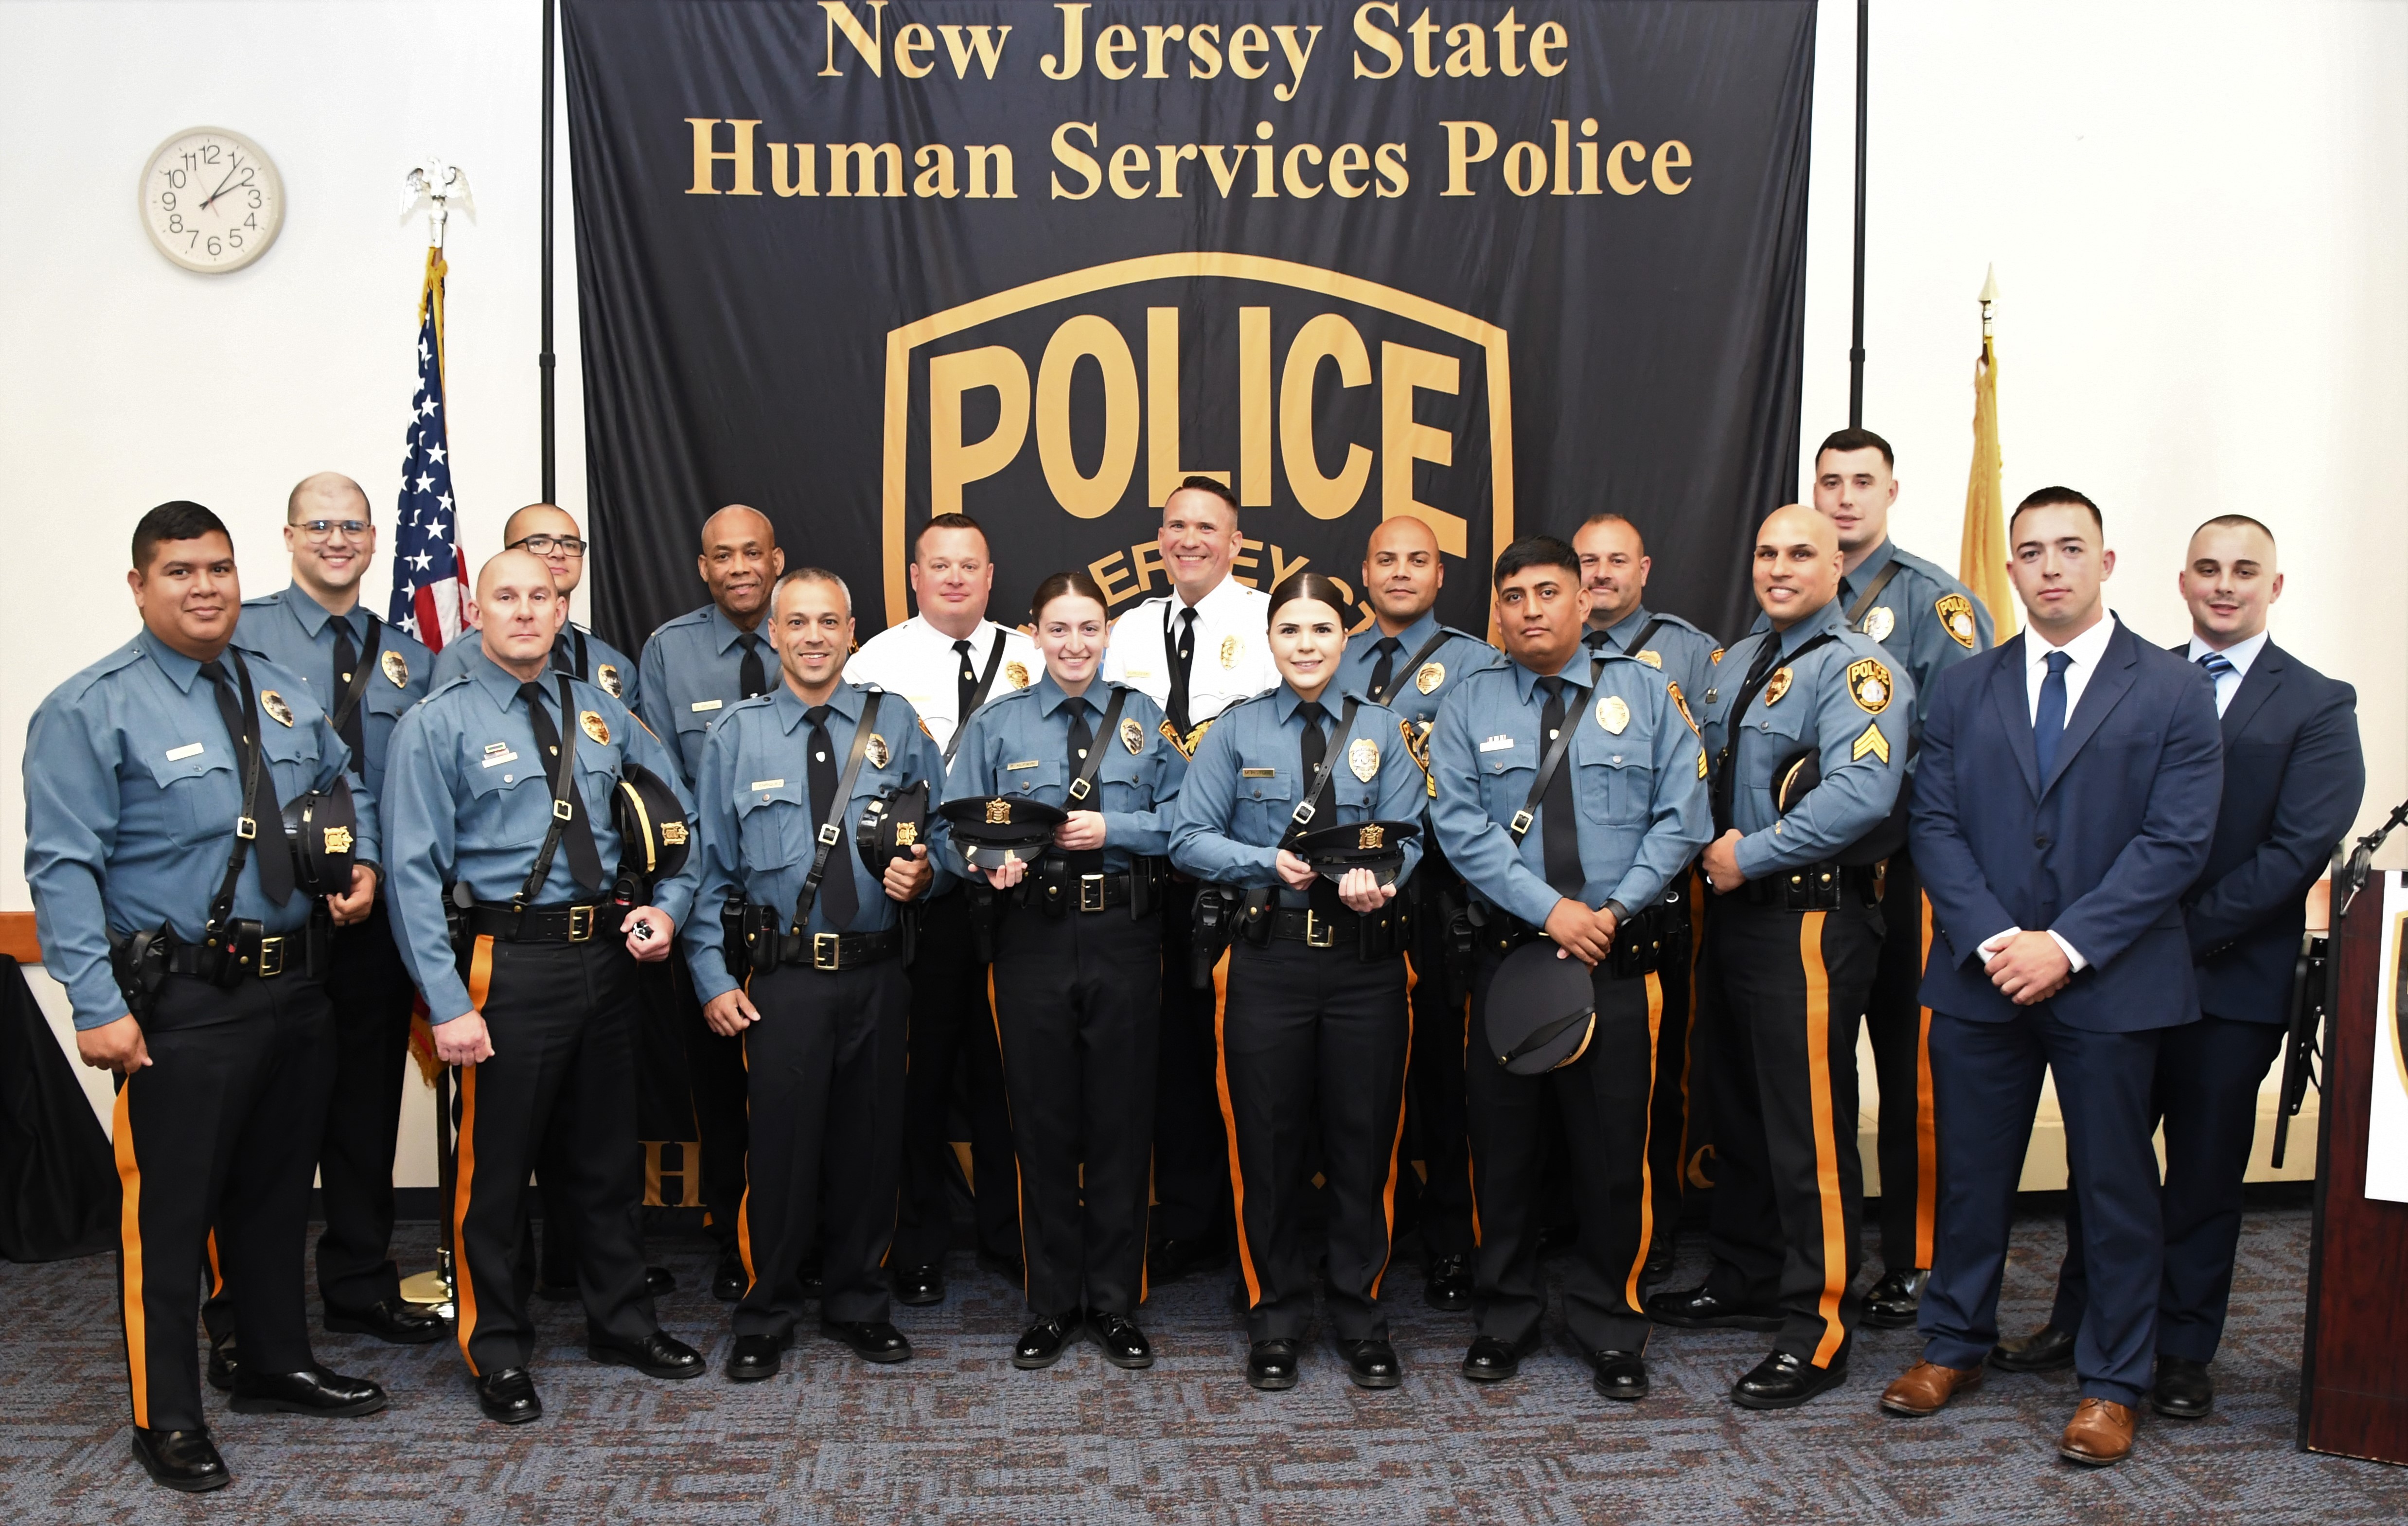 New Jersey State Human Services Police, NJ Public Safety Jobs